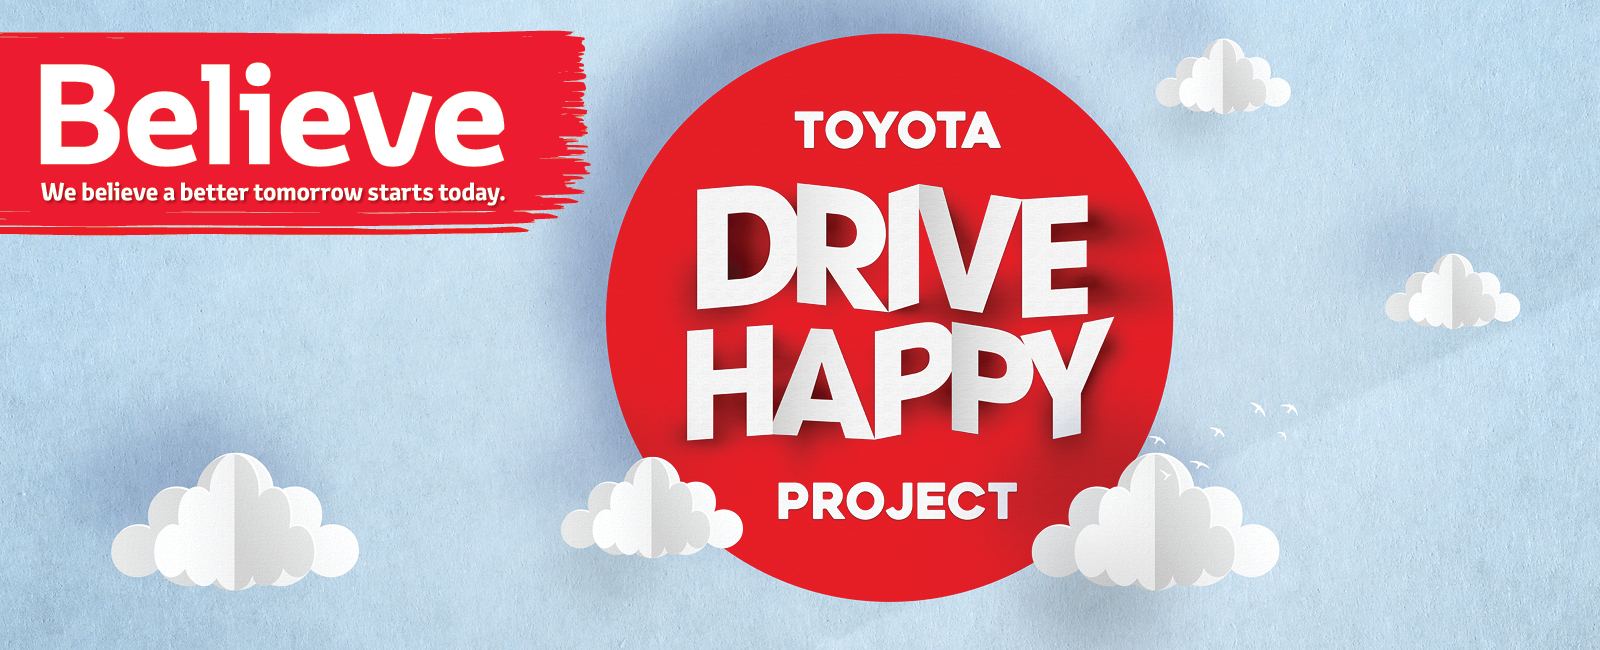 Drive-Happy-Cover-1600x650px_DriveHappy